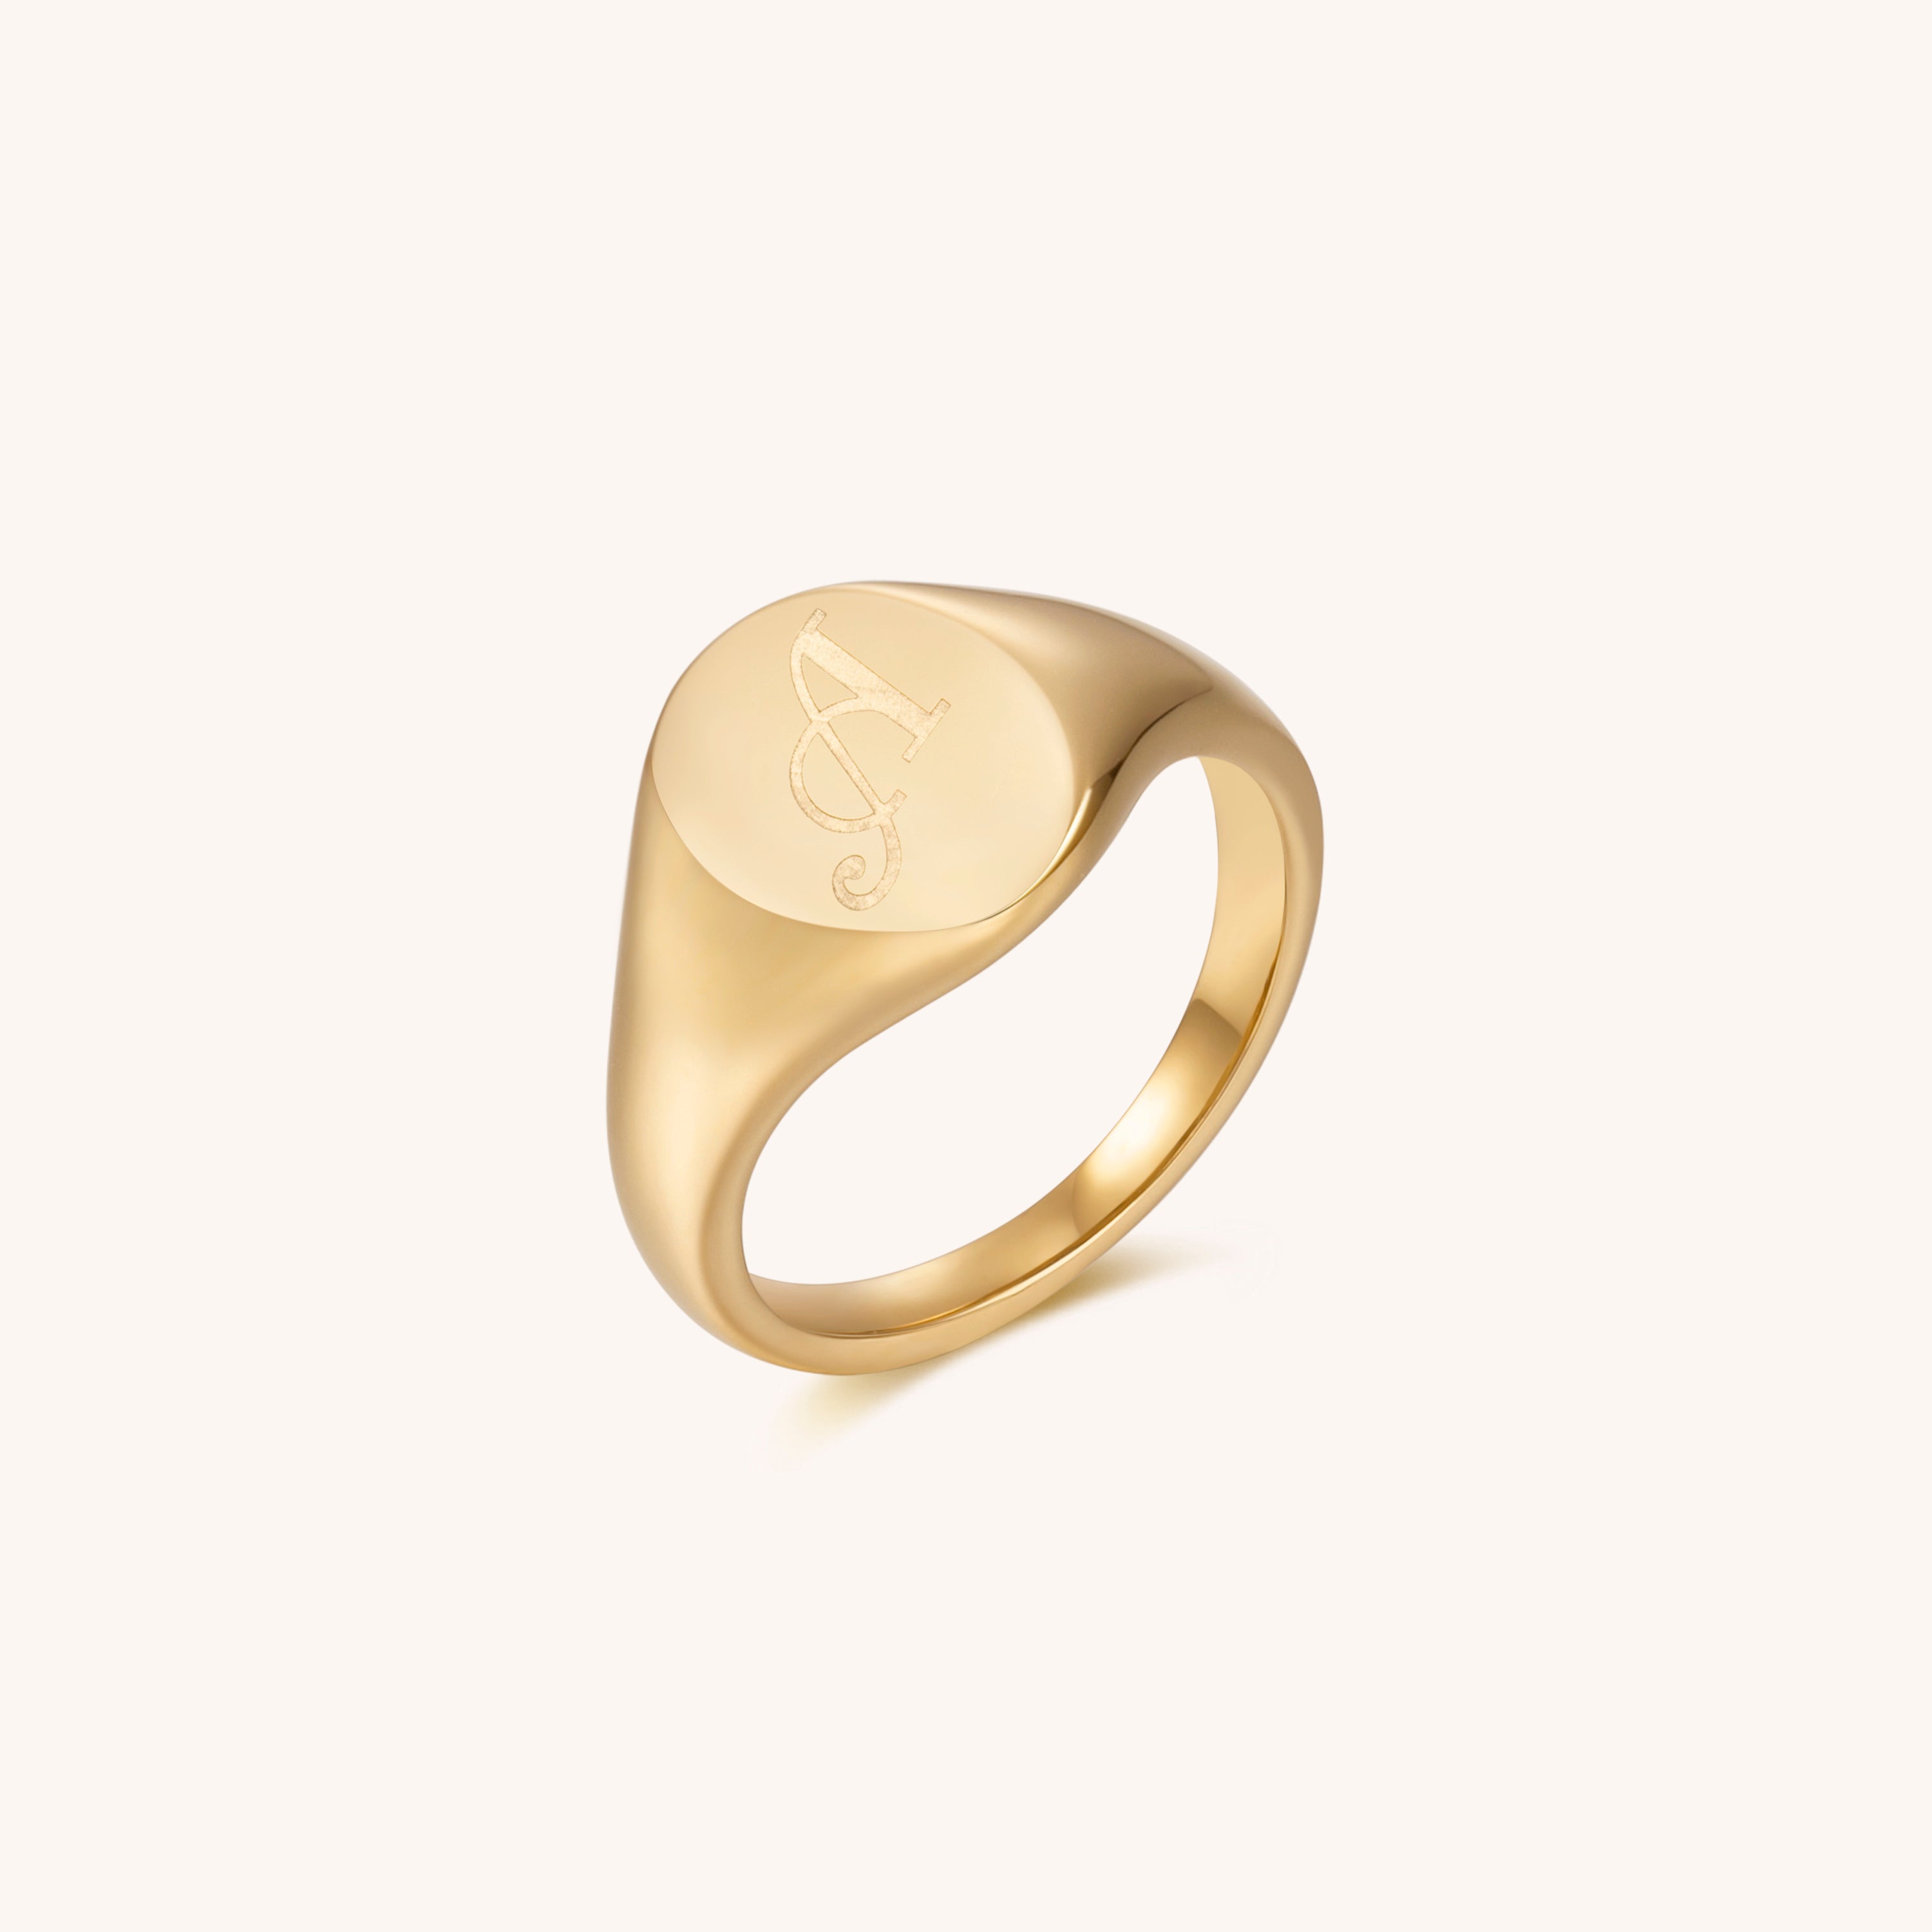 Initial Signet Ring - A